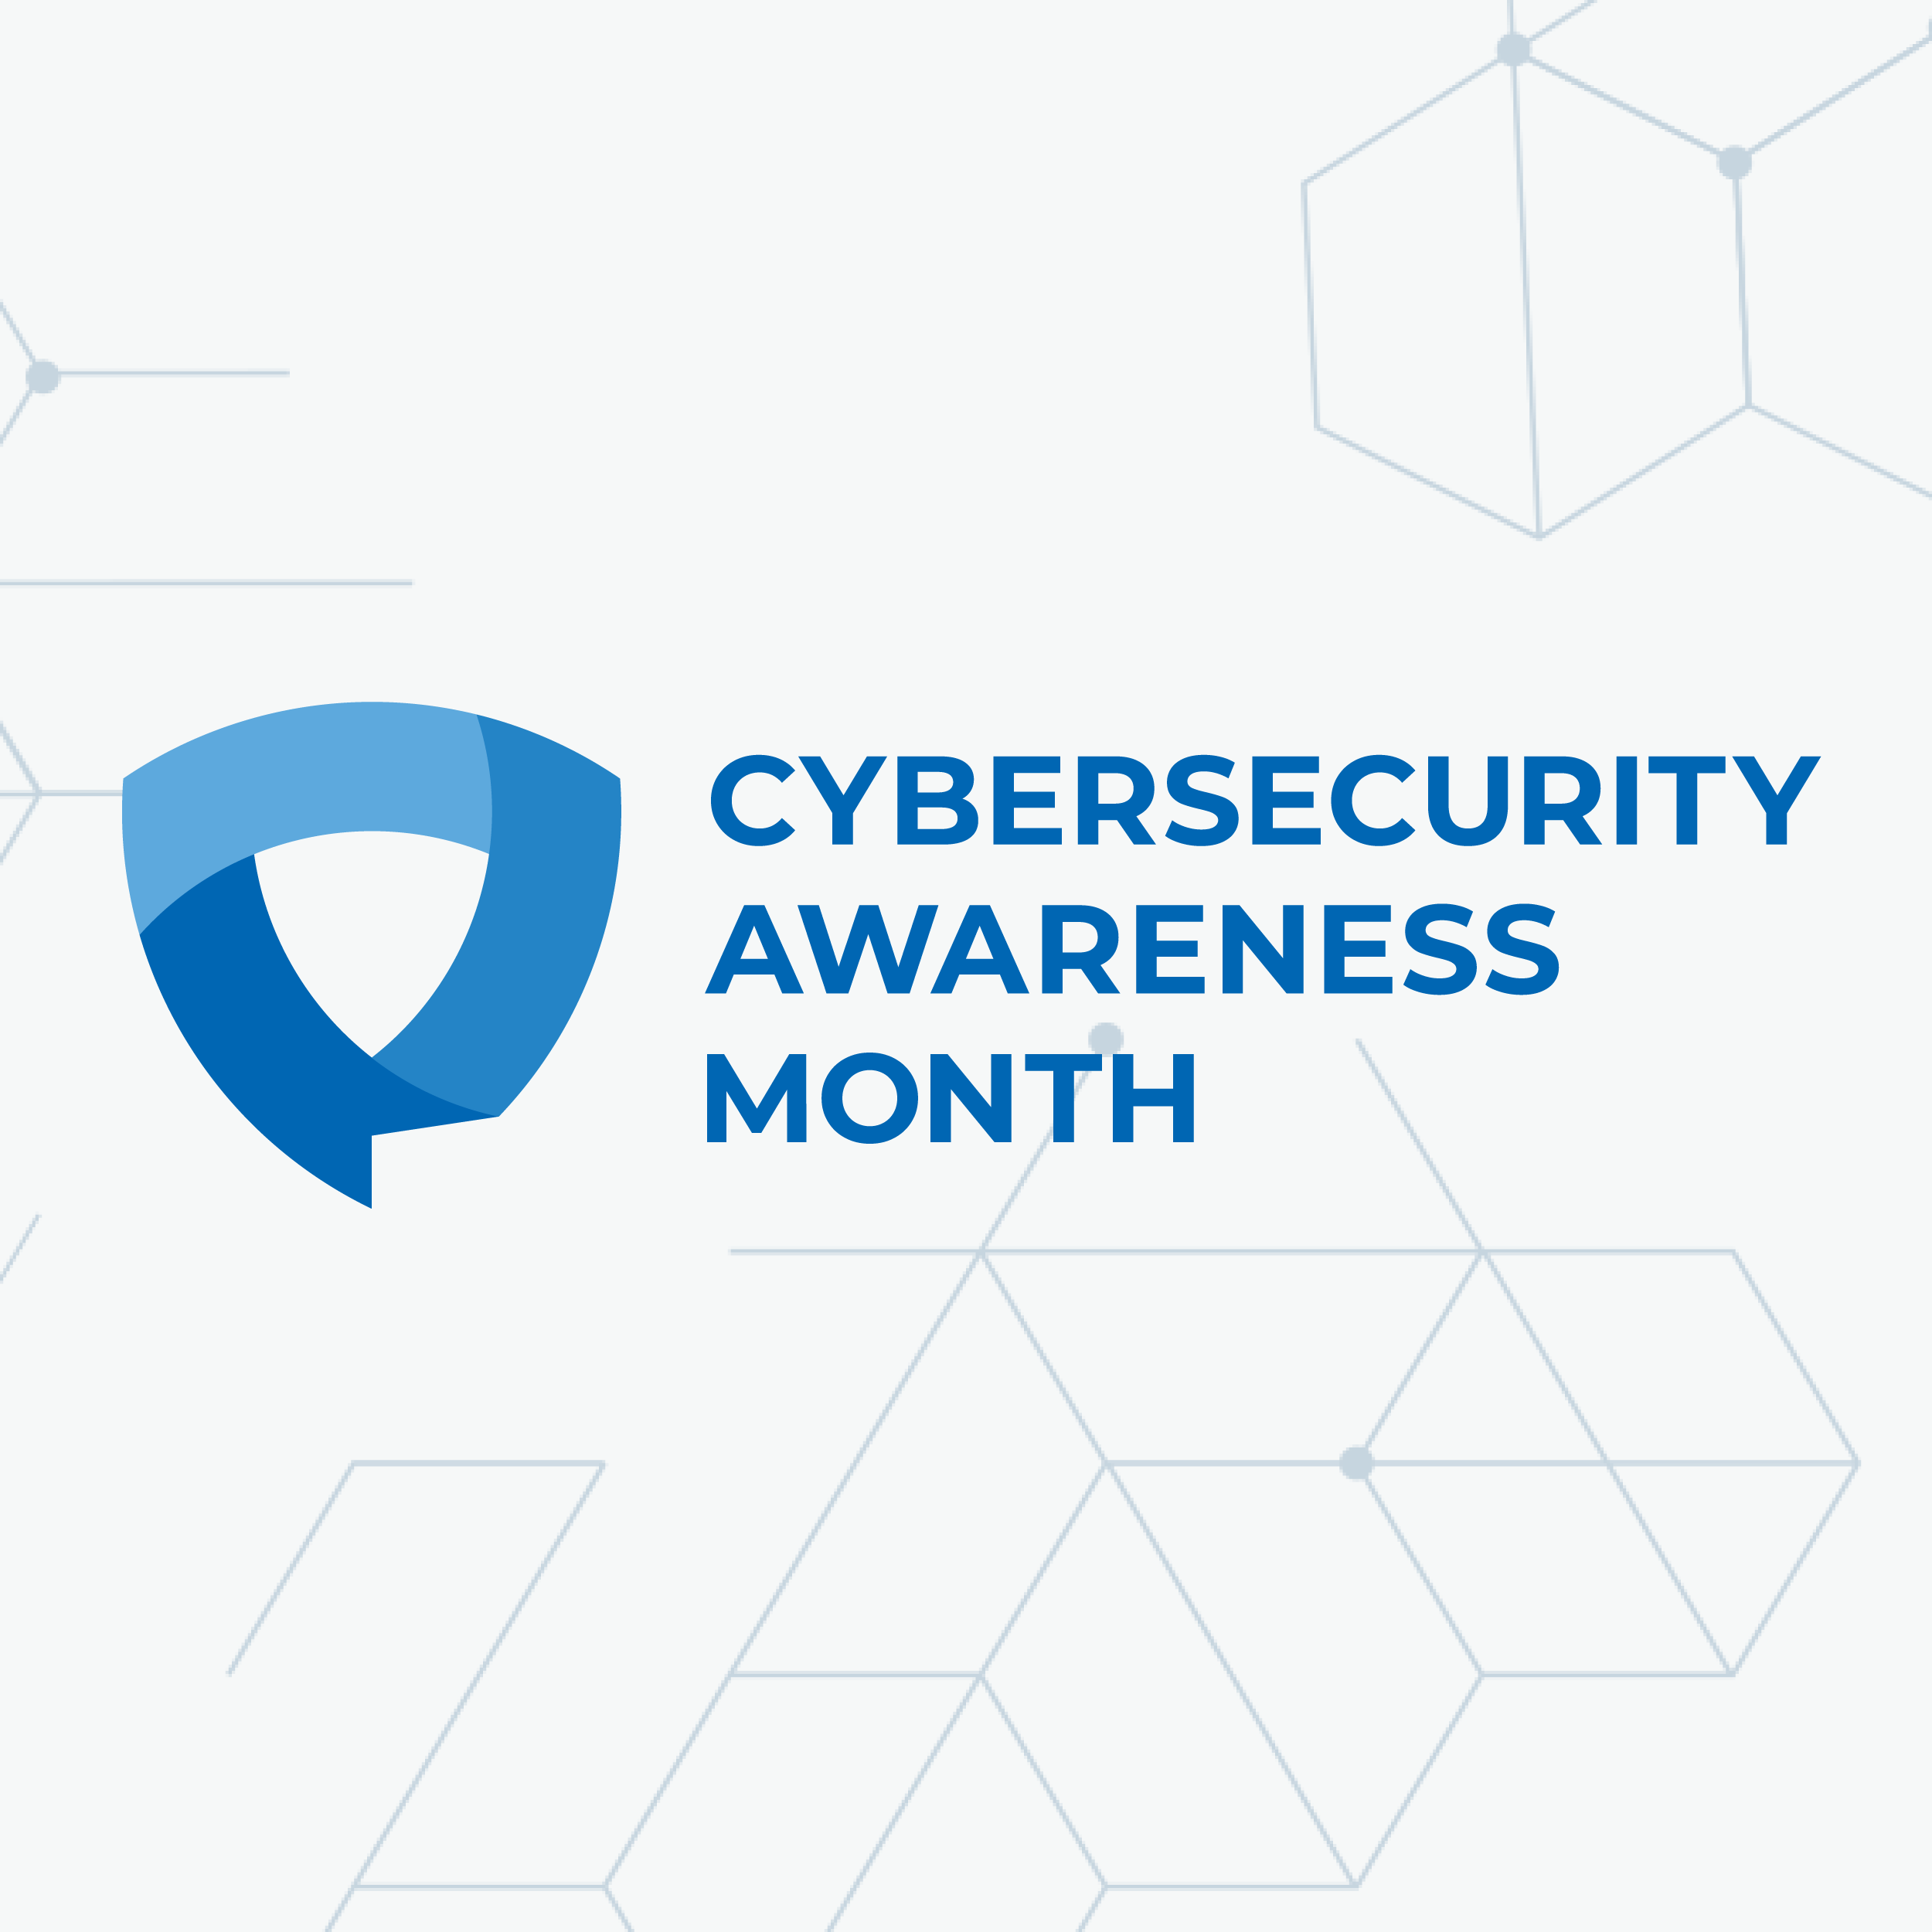 RH-ISAC | RH-ISAC Announces Commitment to Global Efforts Supporting and Promoting Online Safety and Privacy for Cybersecurity Awareness Month - RH-ISAC